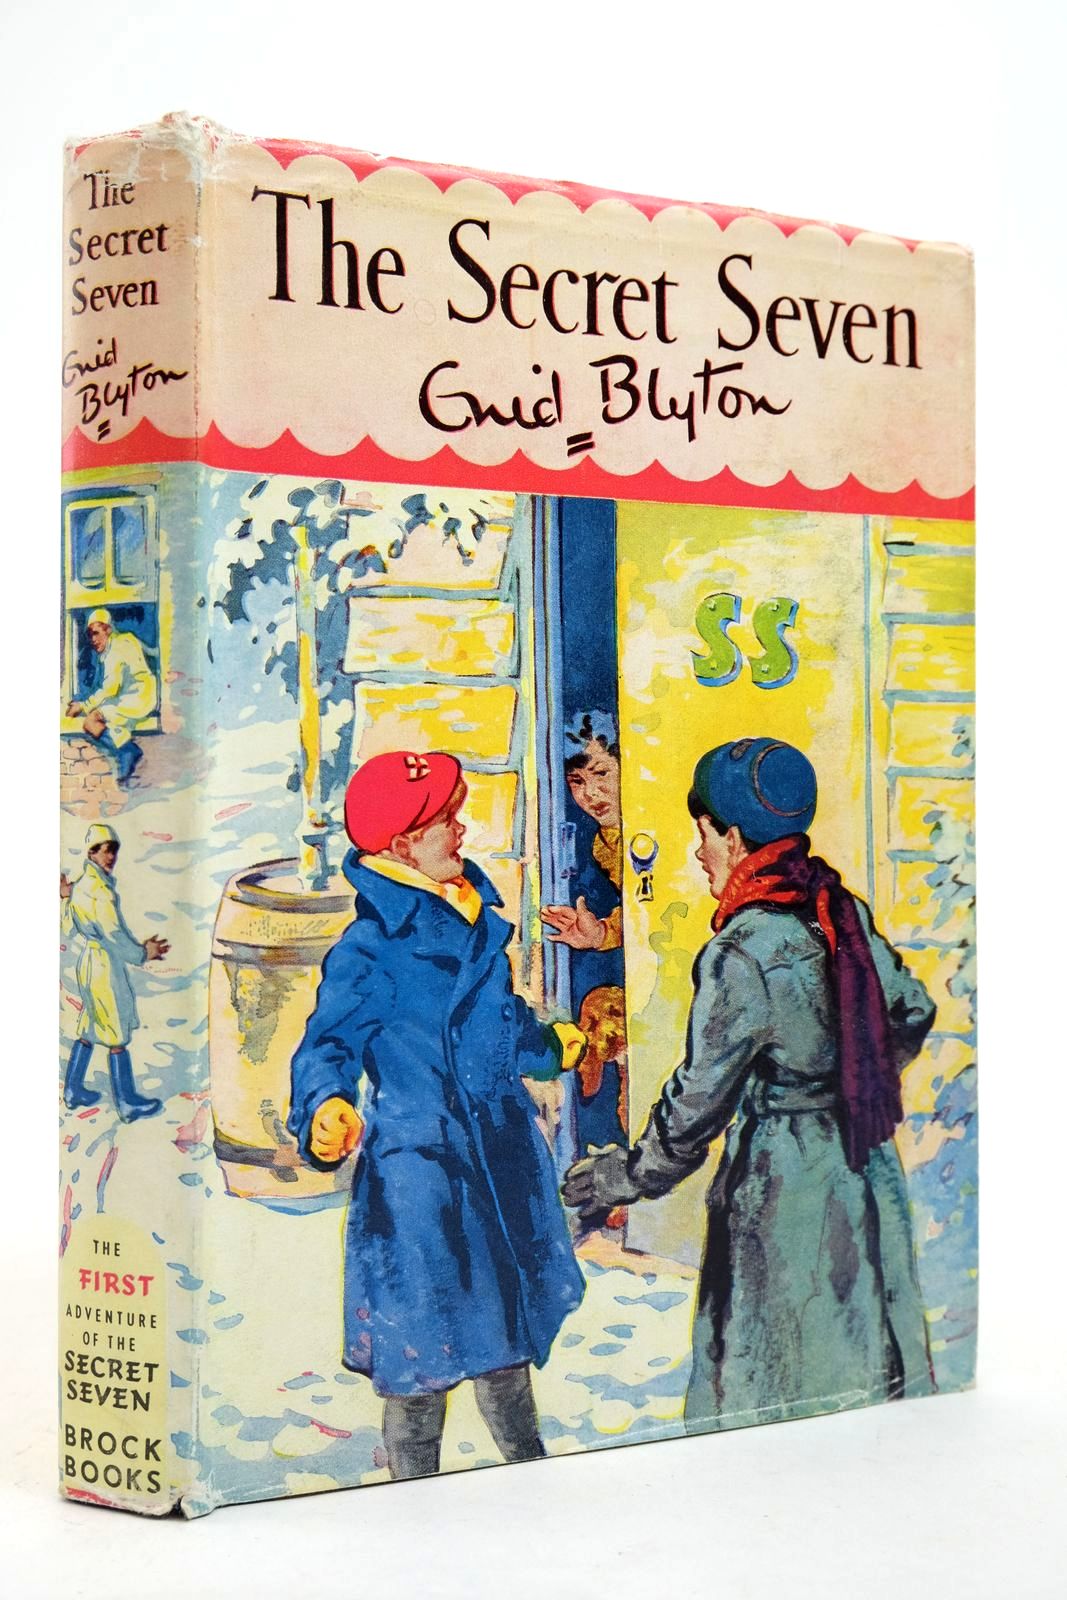 Photo of THE SECRET SEVEN written by Blyton, Enid illustrated by Brook, George published by Brockhampton Press Ltd. (STOCK CODE: 2140466)  for sale by Stella & Rose's Books